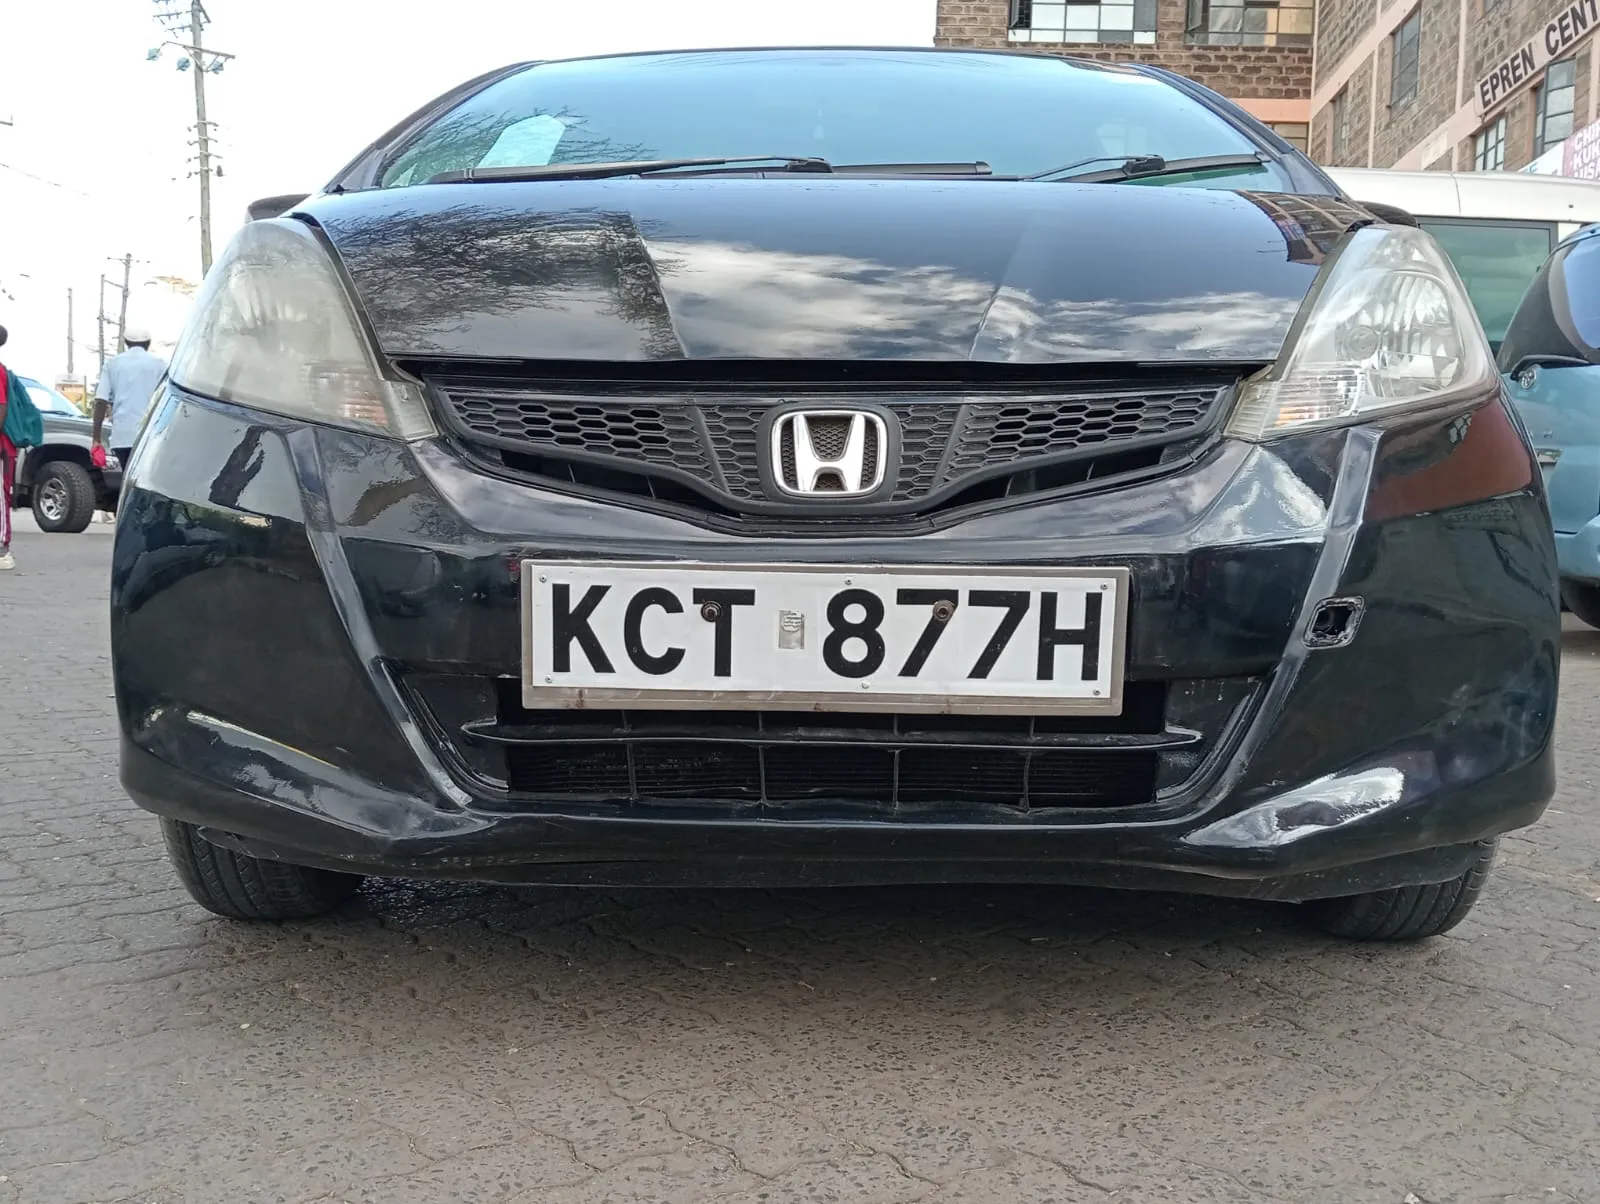 Honda fit for Sale in Kenya 🔥 🔥 QUICK SALE You Pay 30% Deposit Trade in OK Wow hire purchase installments